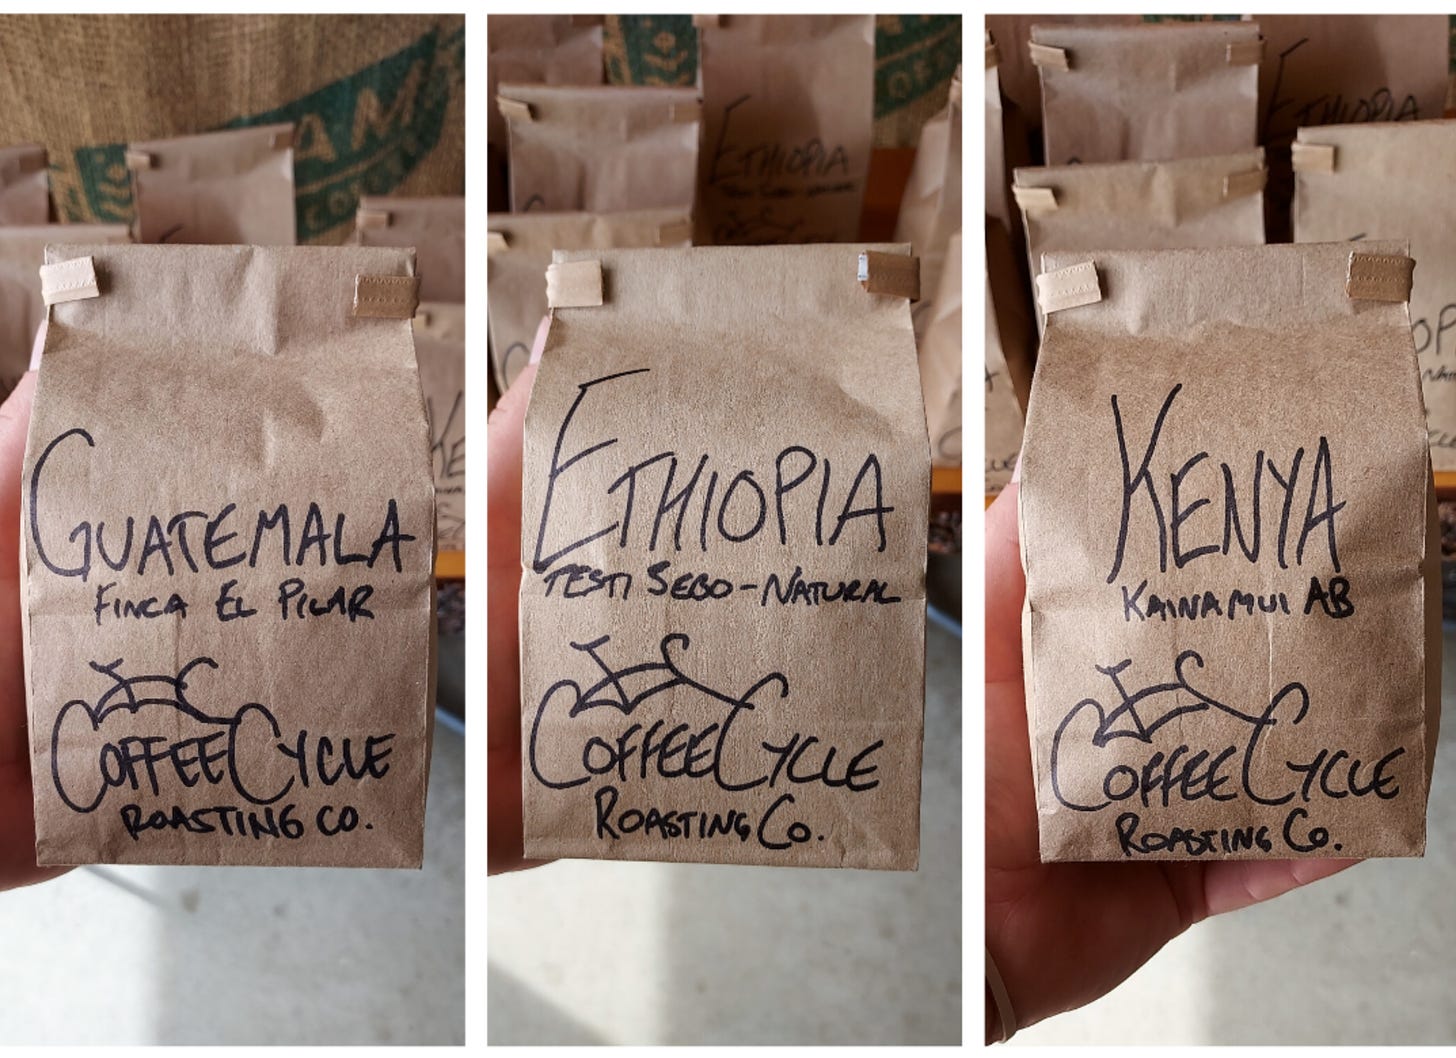 Three side by side images of brown paper coffee bags with a Coffee Cycle bicycle logo drawn on with black sharpie, and the coffee origin-Guatemala, Ethiopia, Kenya-above the logo. The bags are held up close to the camera and blurred out bags are seen in the background.